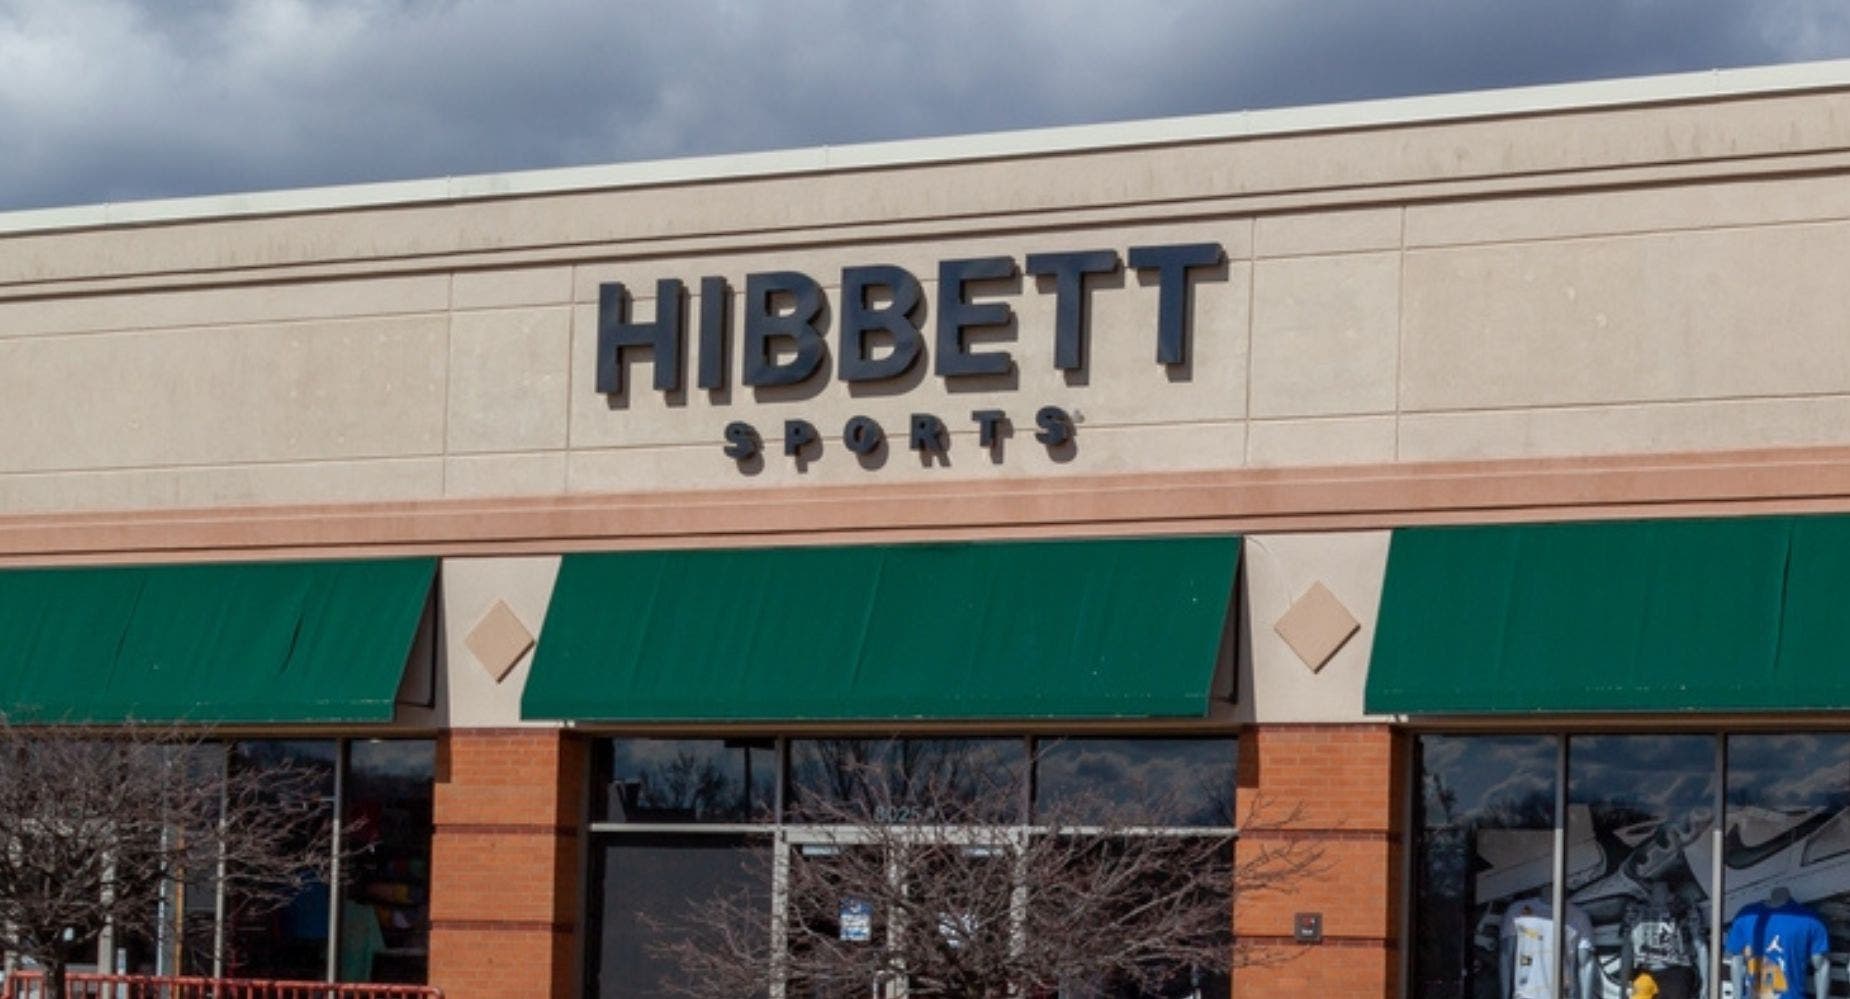 Hibbett Stock Drops After Q1 Earnings Miss Amid Weakened Consumer Confidence